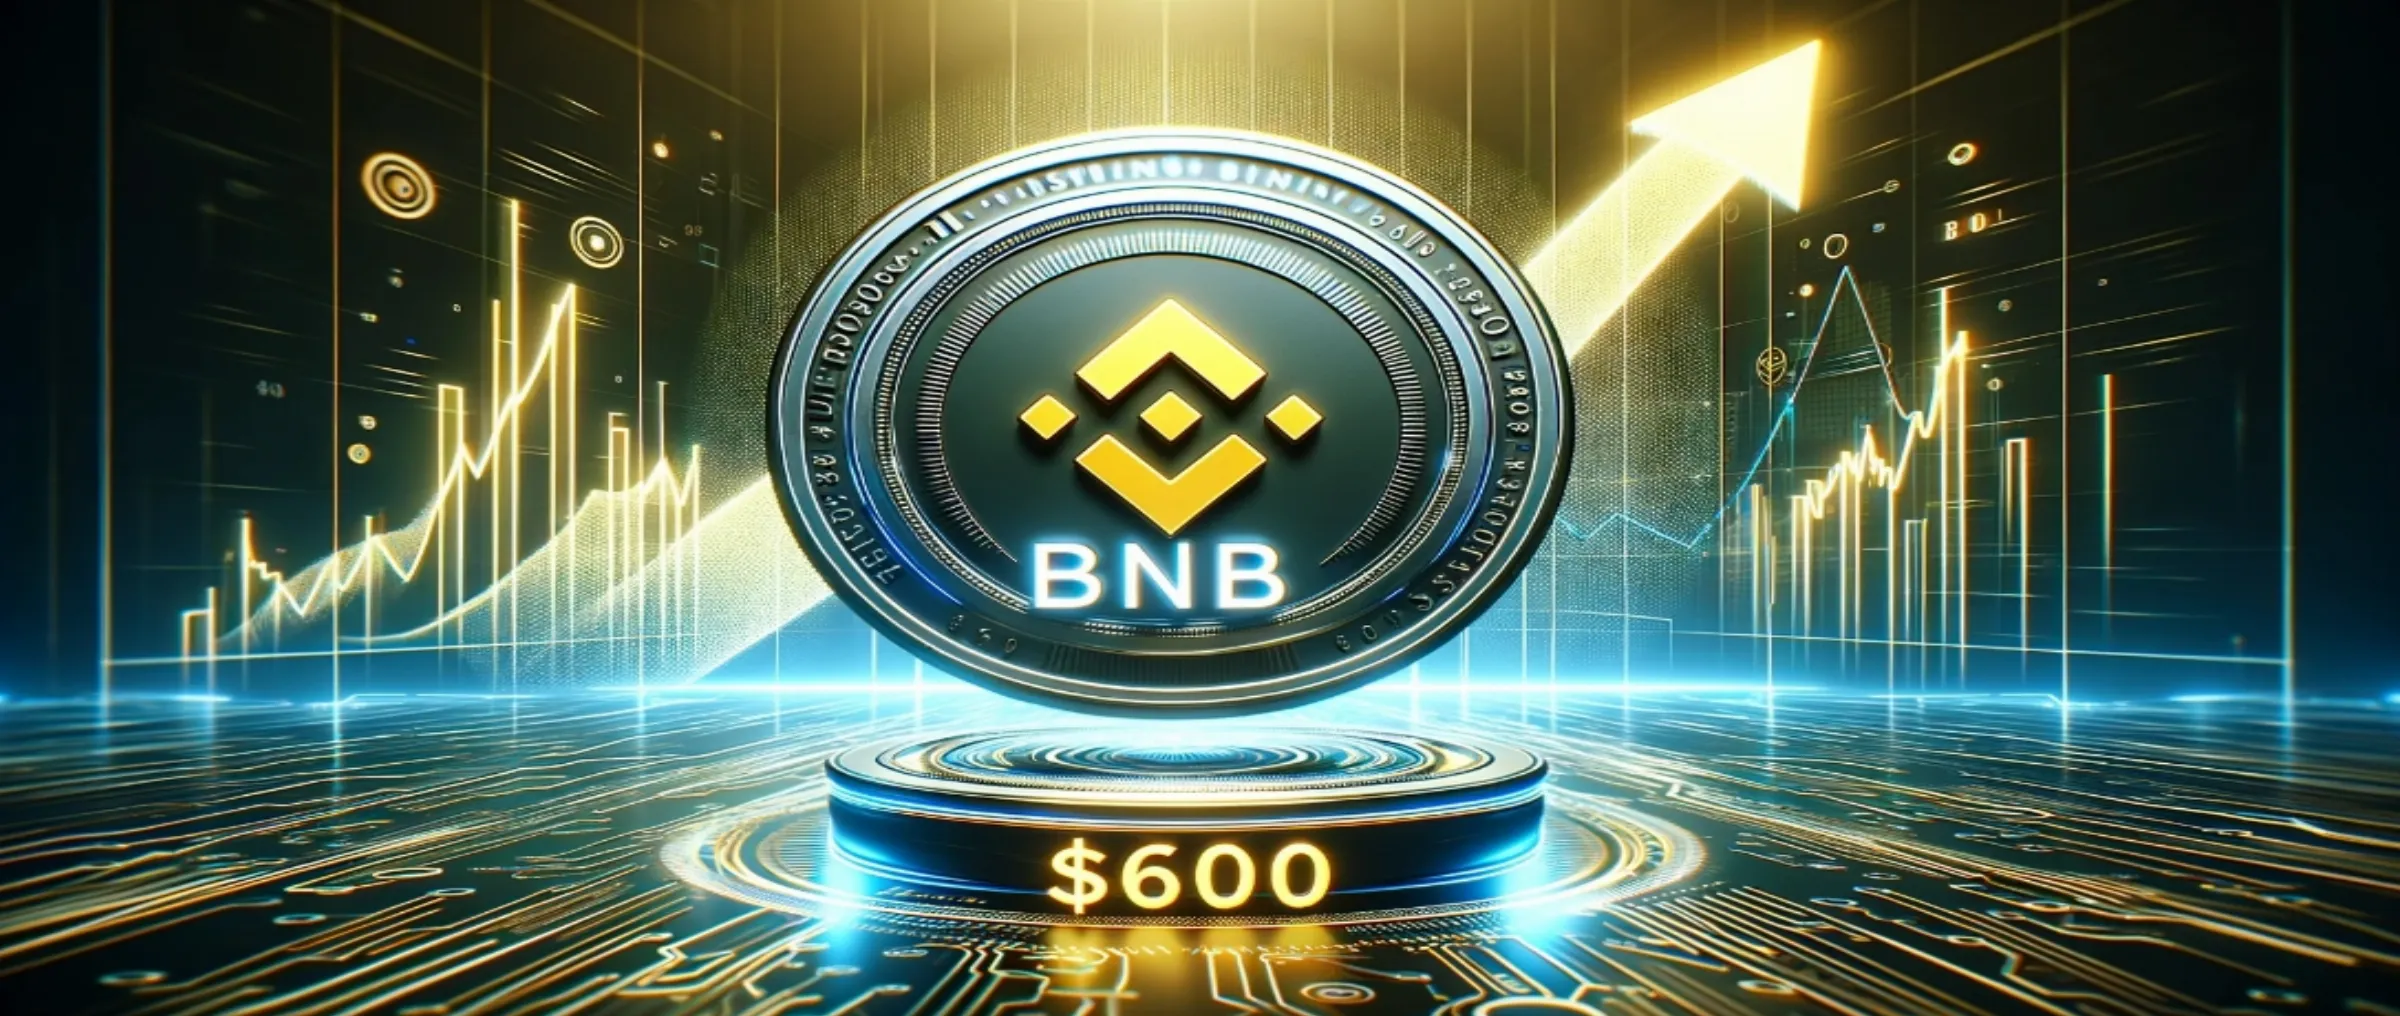 The BNB exchange rate has reached $600 for the first time since 2021